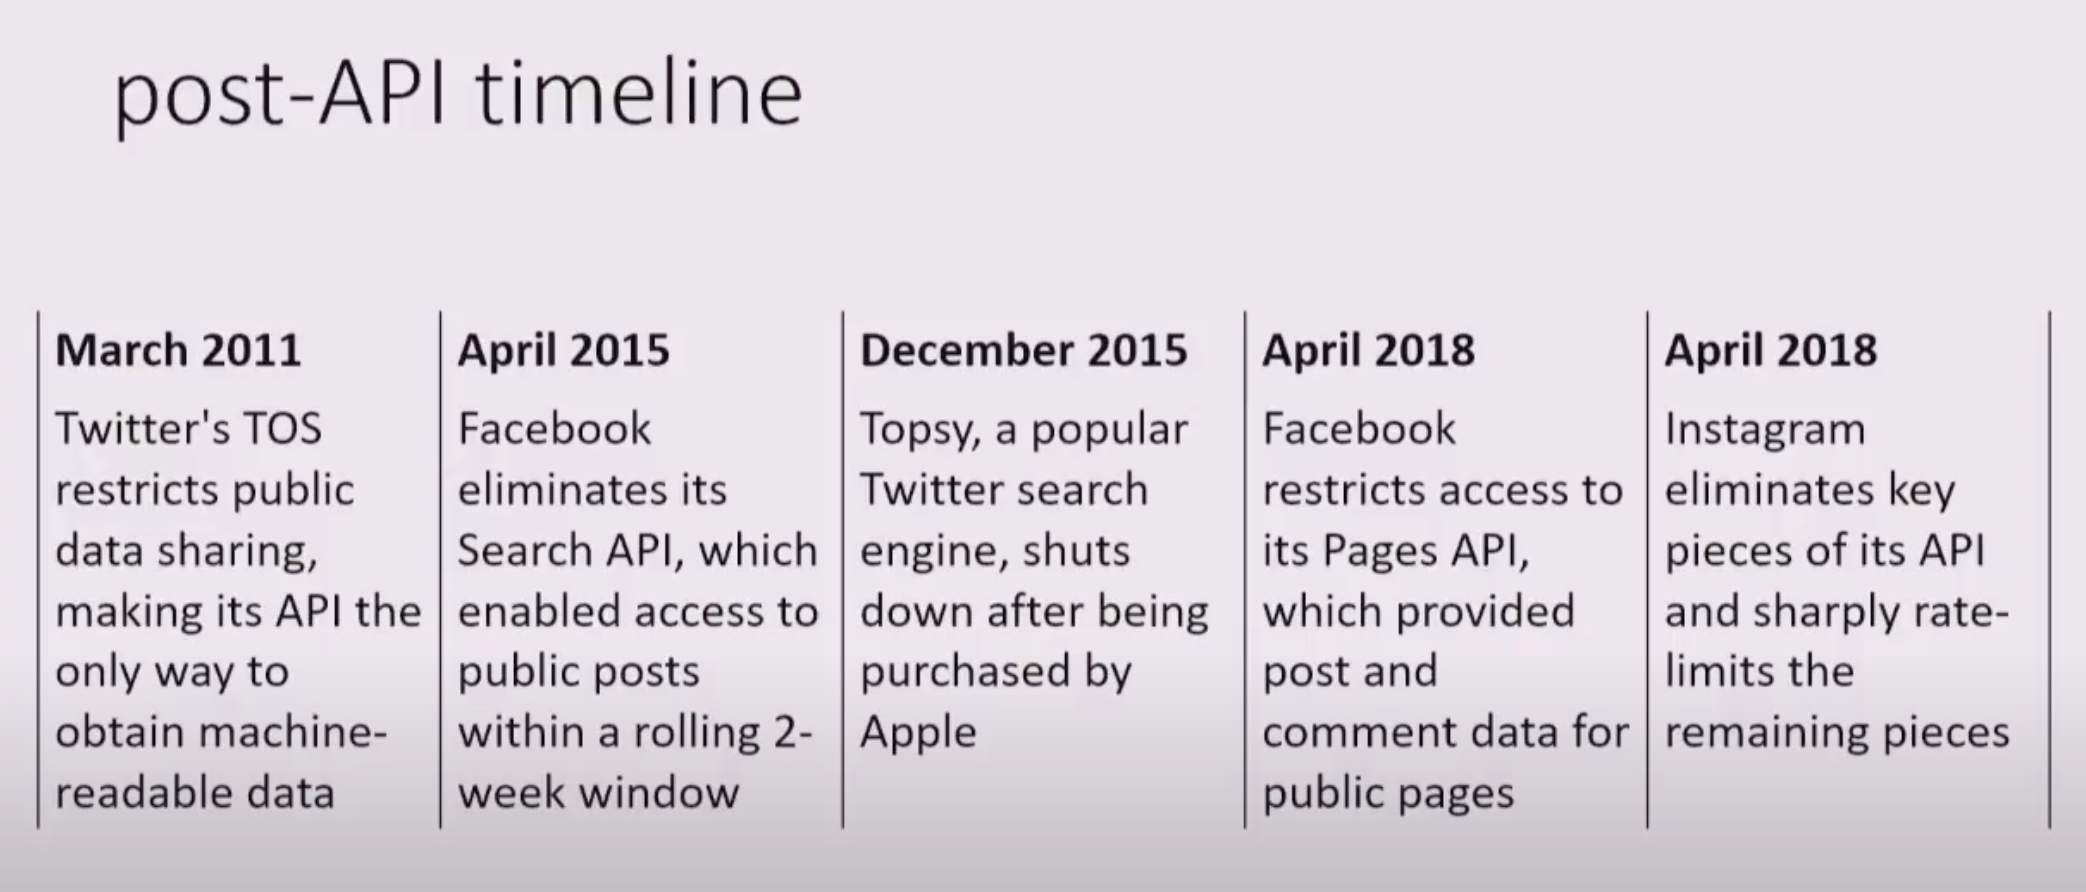 Short timeline of events leading to significant API changes across social media platforms